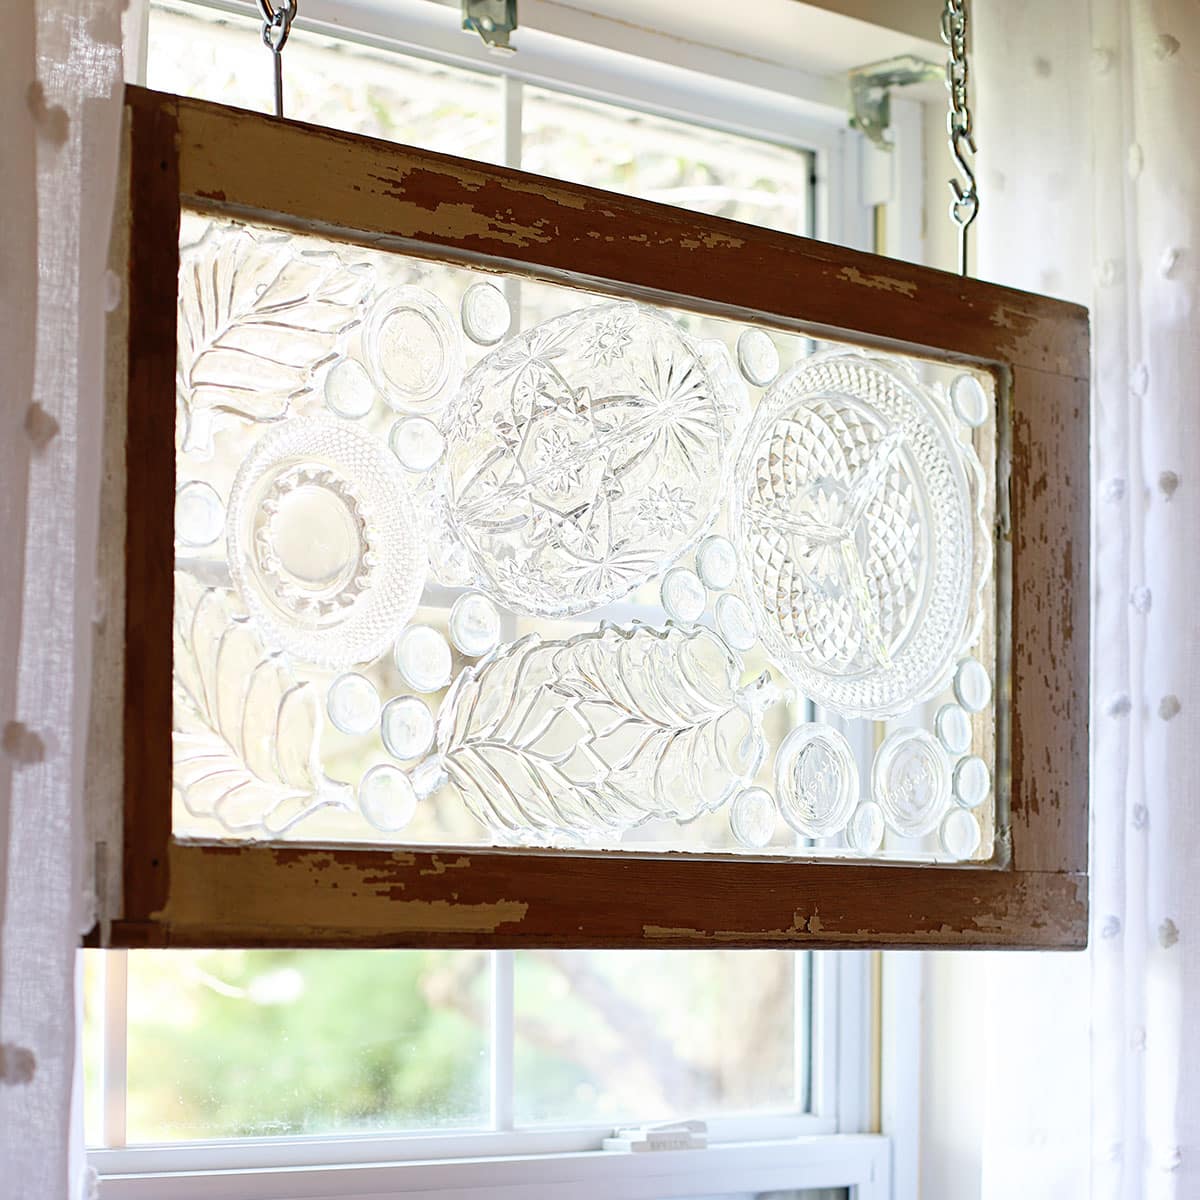 How to make window art with glass plates from the thrift store for a mosaic look.